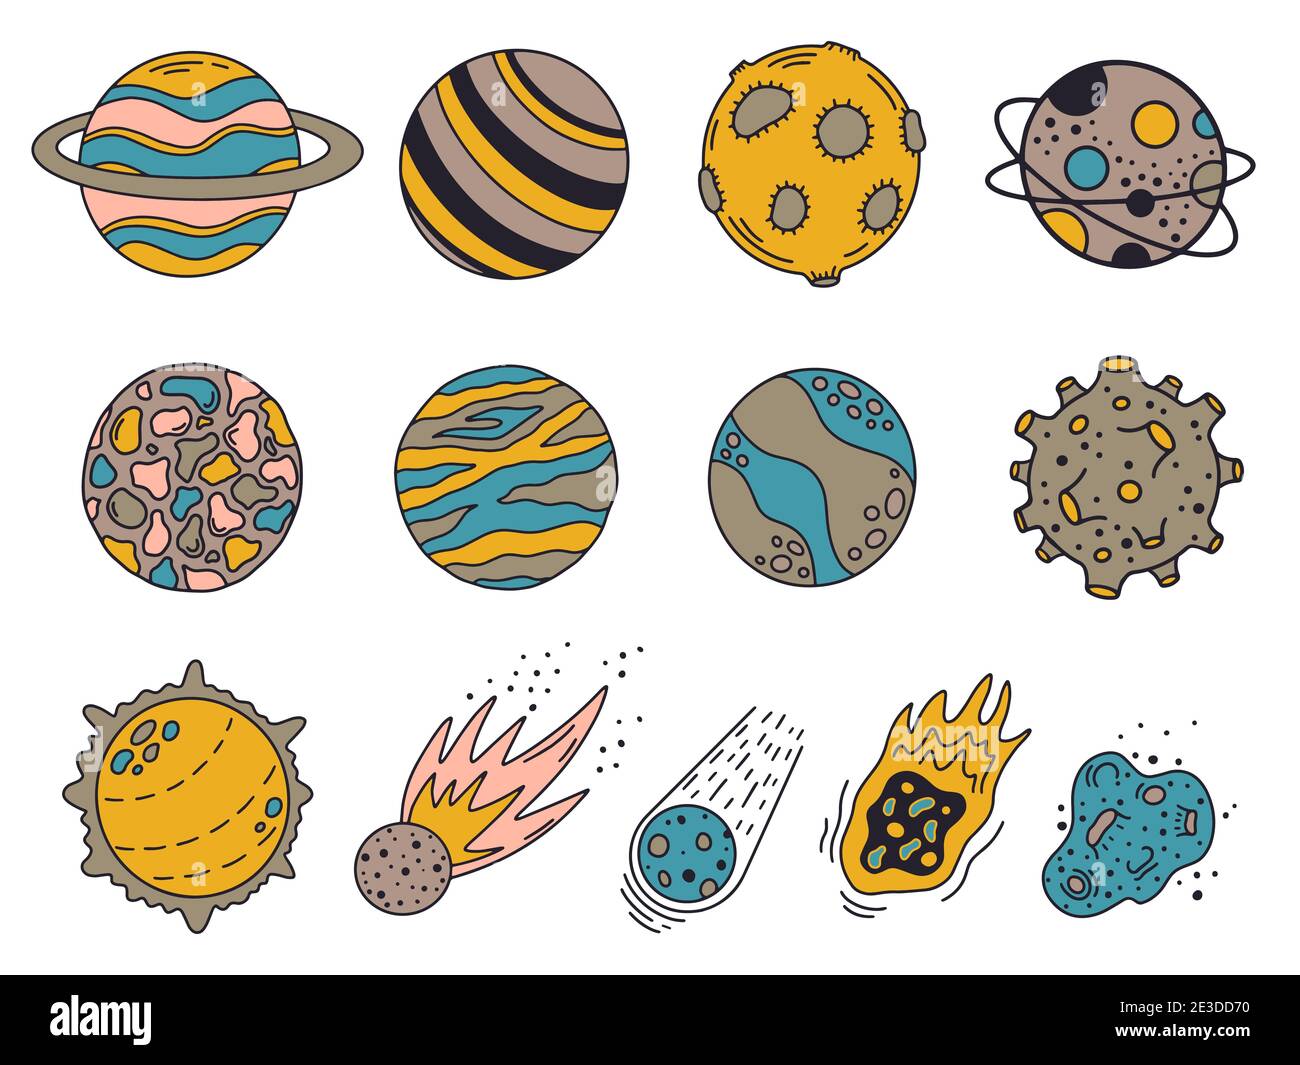 Doodle planets. Hand drawn universe planets and meteorites, cute solar system bodies. Cosmic elements vector background illustration Stock Vector